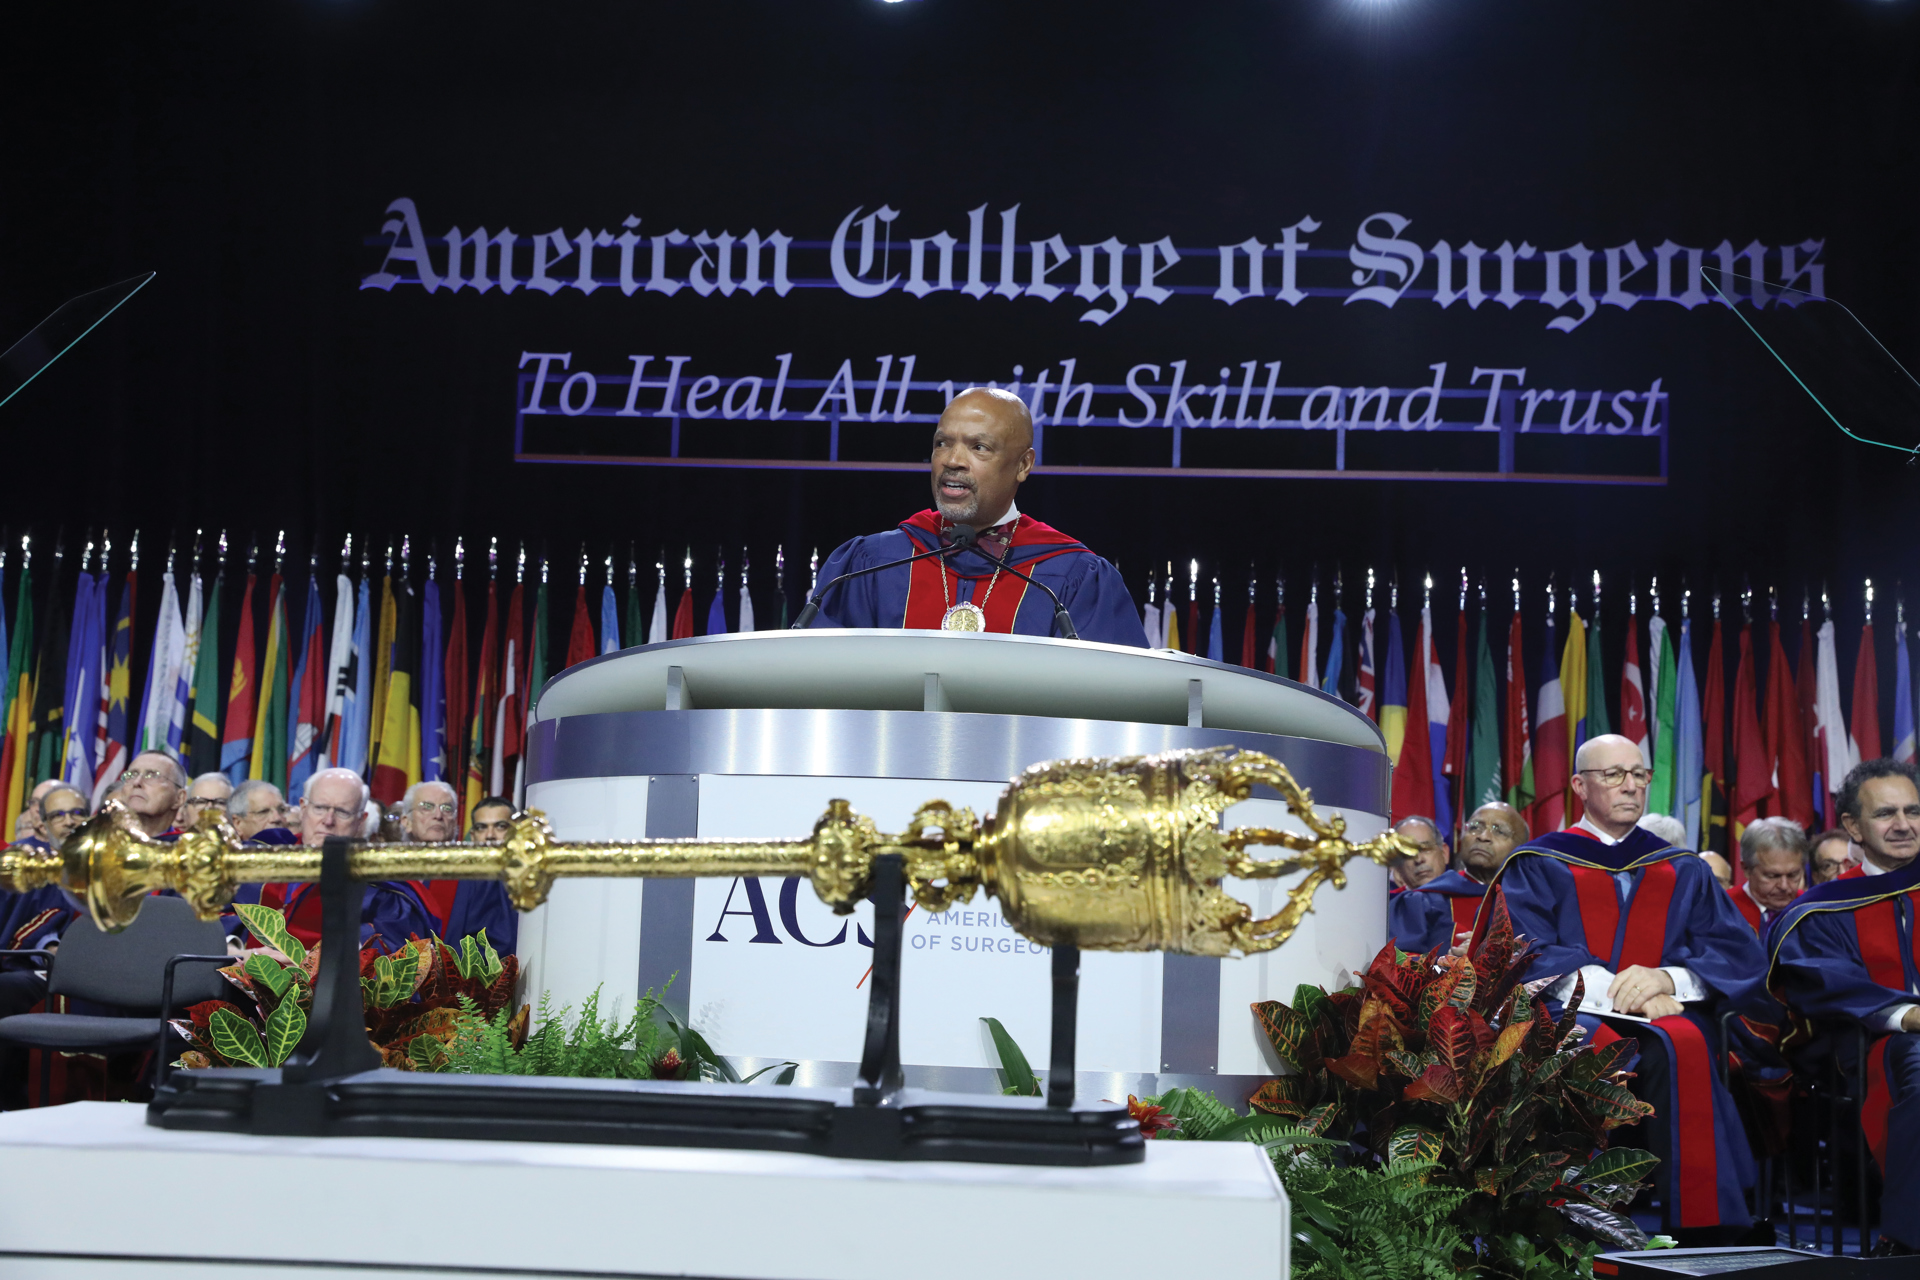 ACS President Exhorts Inclusive Excellence in Surgery